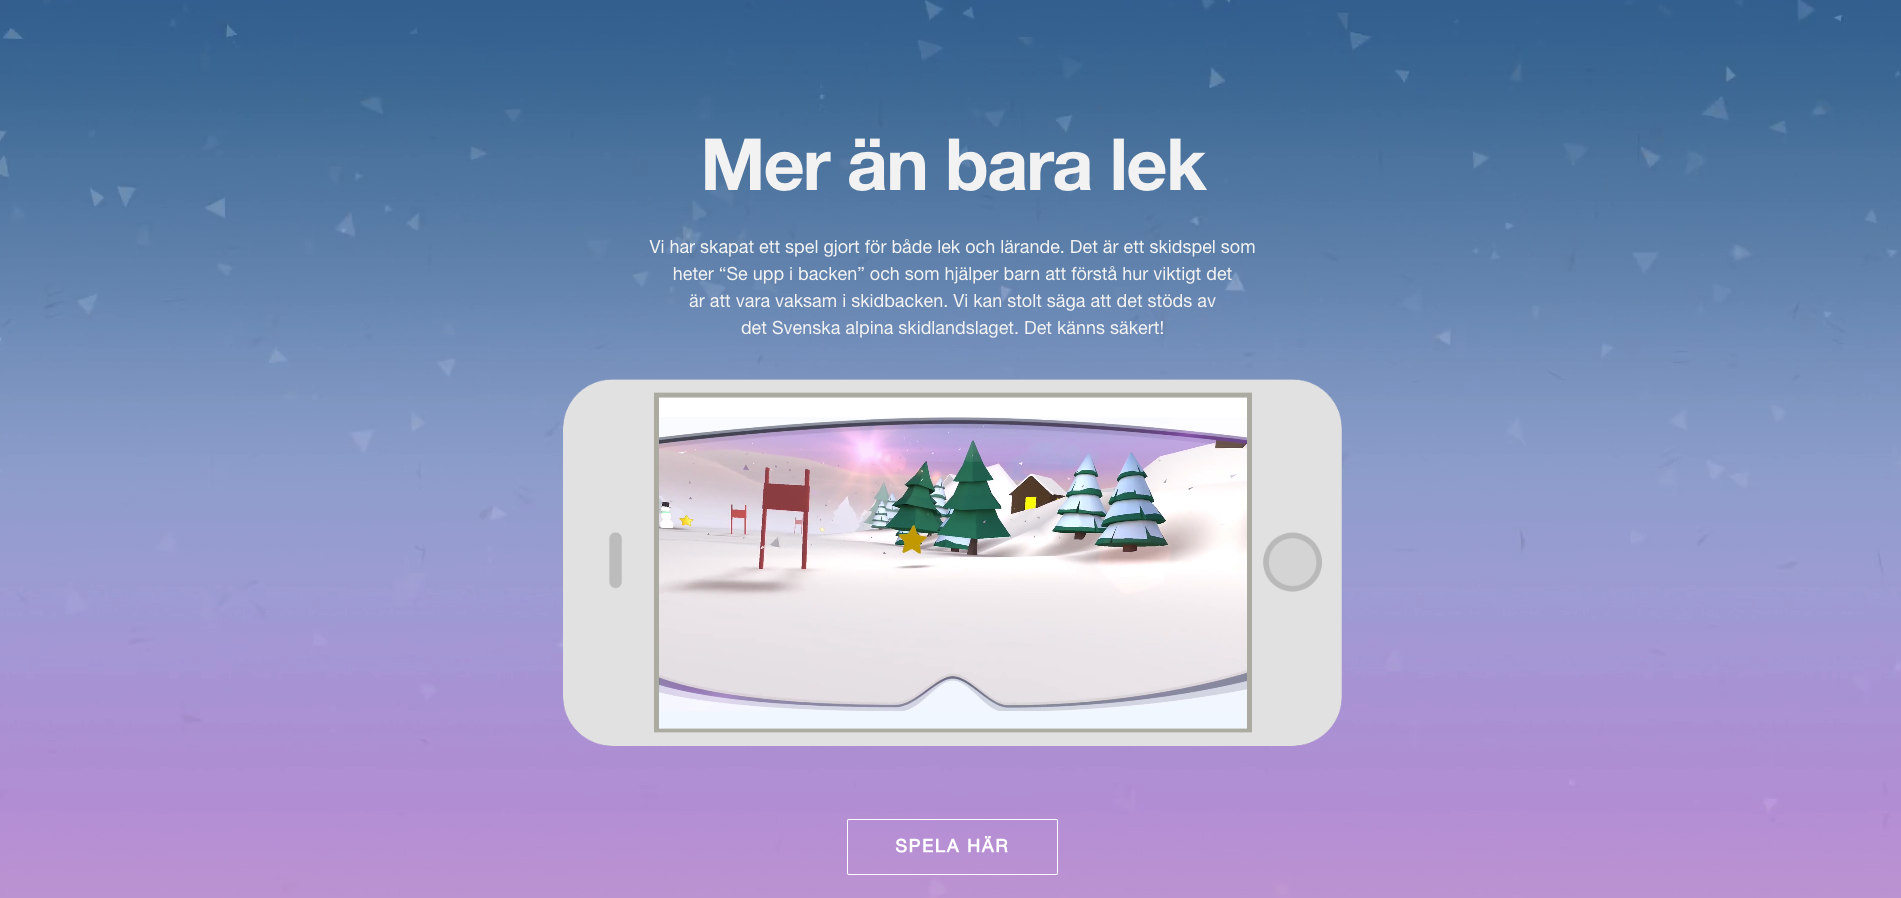 augmented reality website design 2019 trends